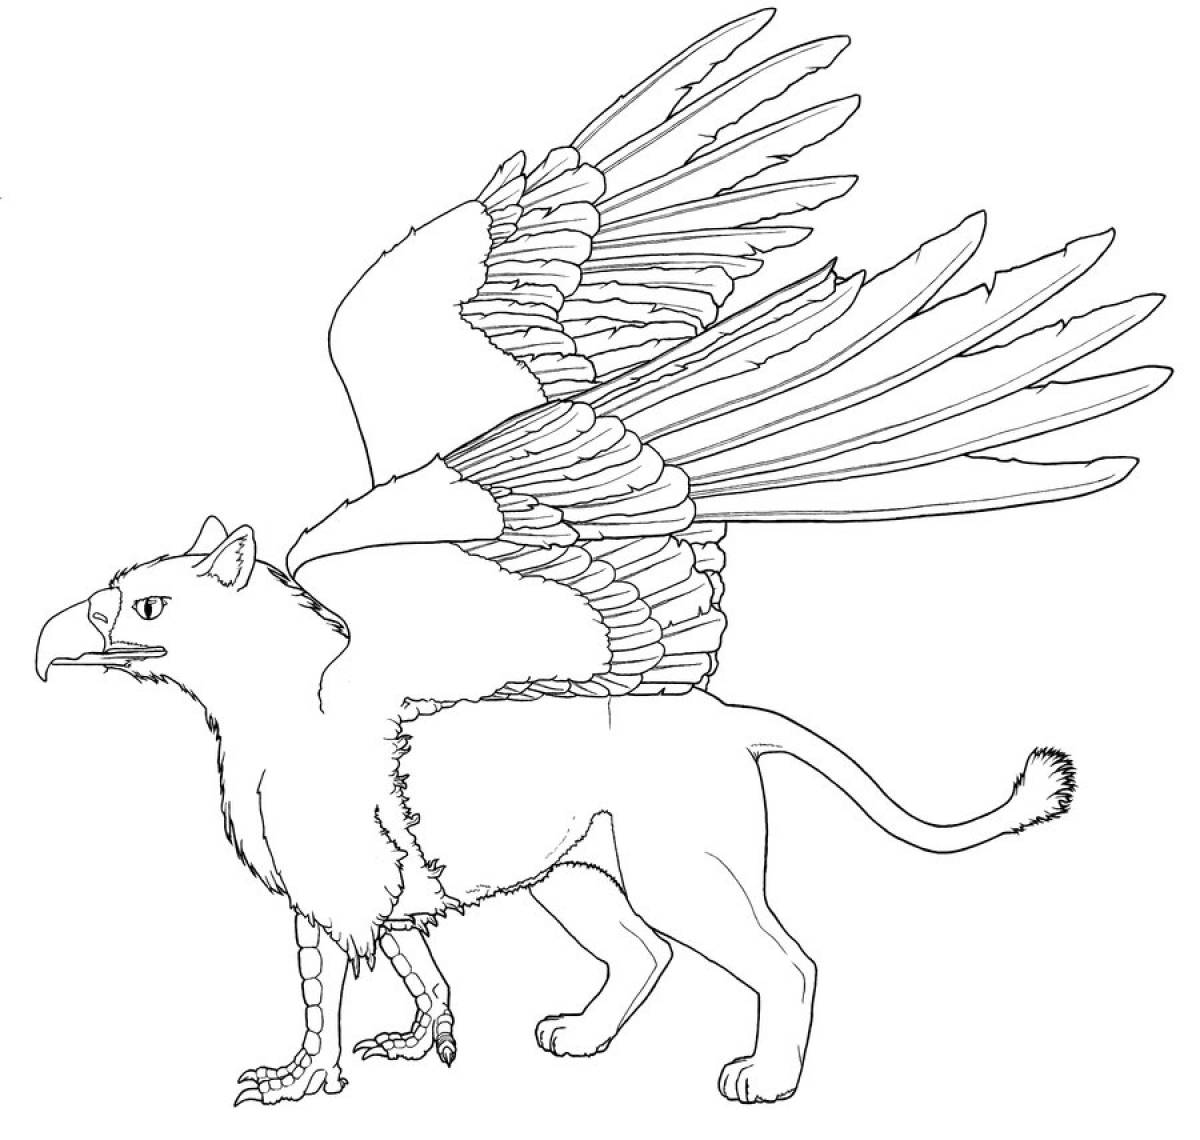 Drawing of a griffin